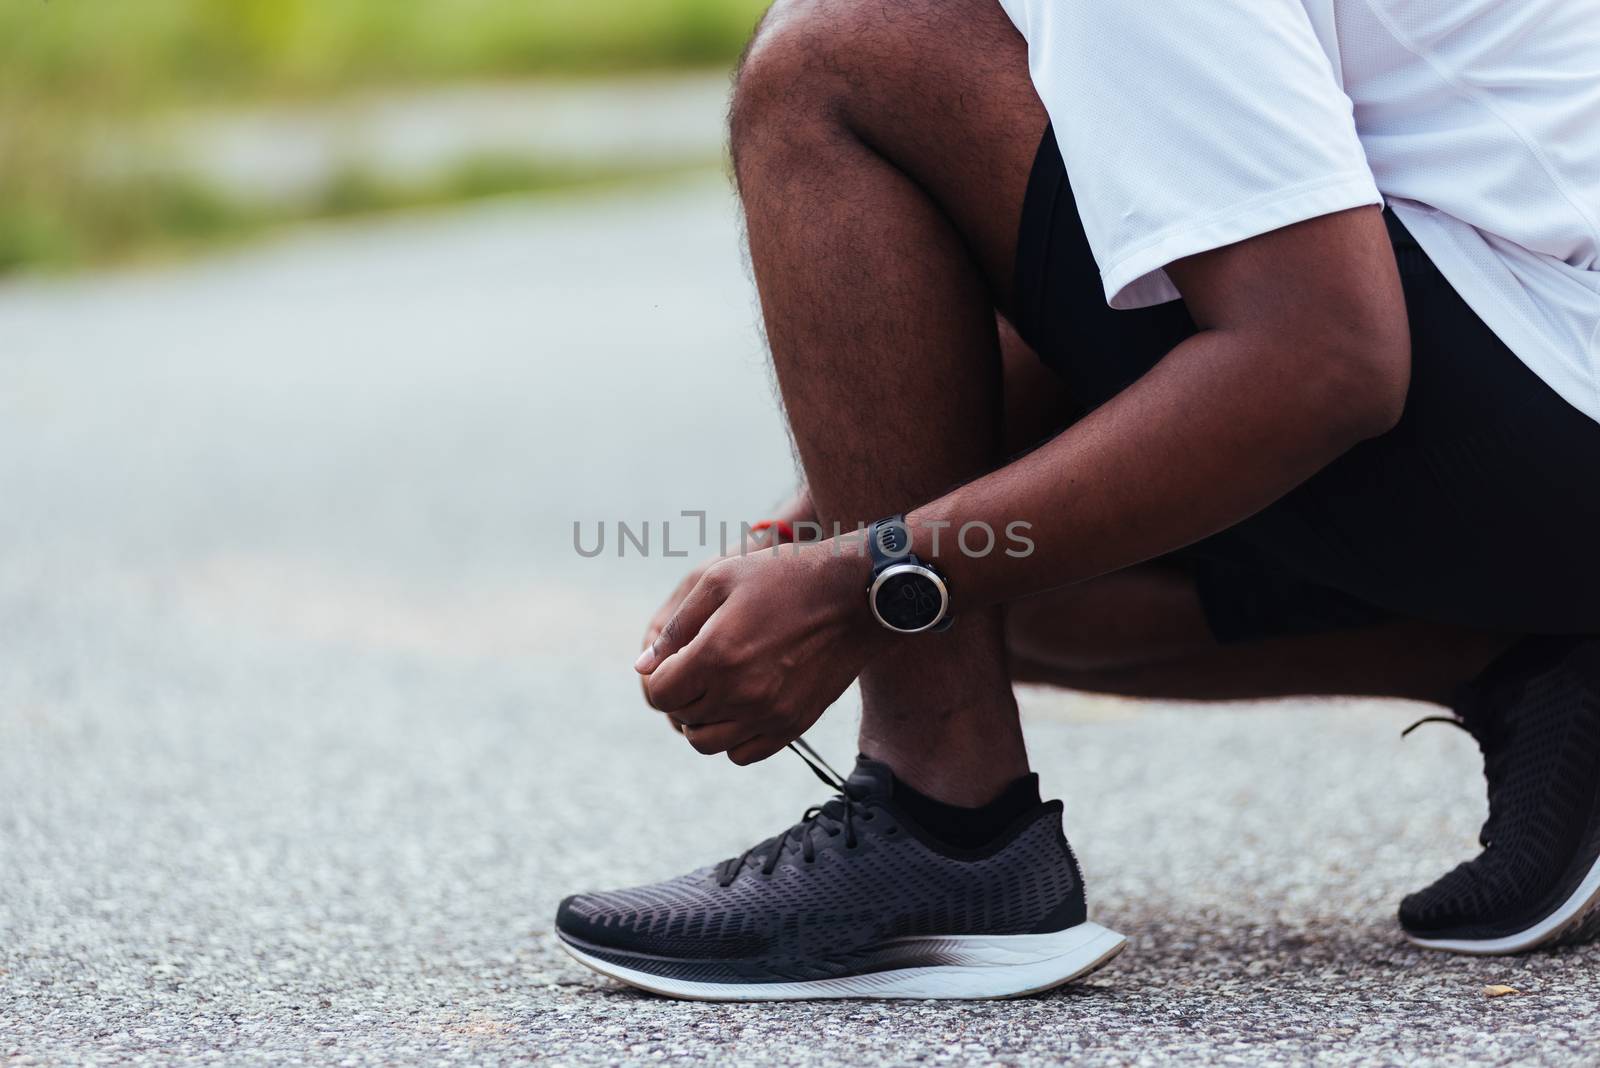 Close up Asian sport runner black man wear watch sitting he trying shoelace running shoes getting ready for jogging and run at the outdoor street health park, healthy exercise workout concept